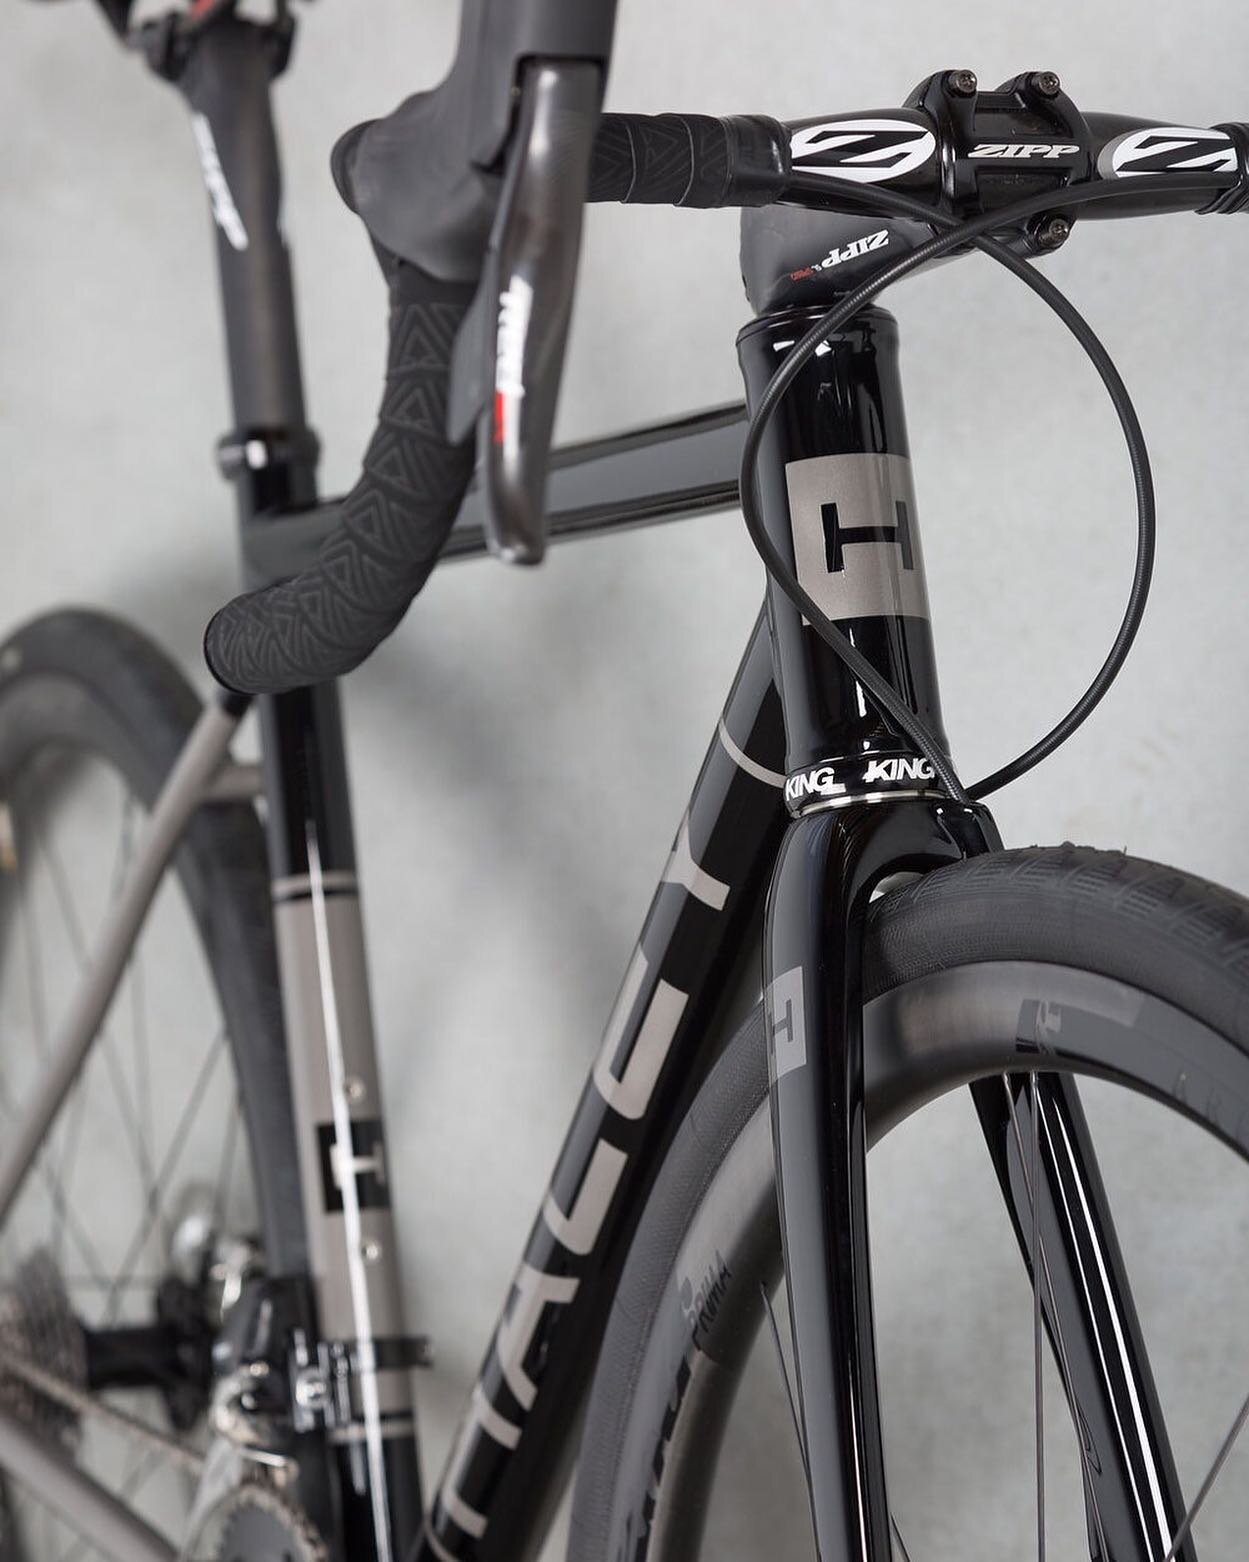 Our bikes are ready for your next adventure!! 

#haleycycles #sanjose #sanjosecalifornia #gravelbike #gravel #gravelgrinder #gravelride #gravelbikes #gravelbikes #gravelcyclist #tybike #titaniumbike #handmadebikes #handmade #madeintheusa #cycling #cy